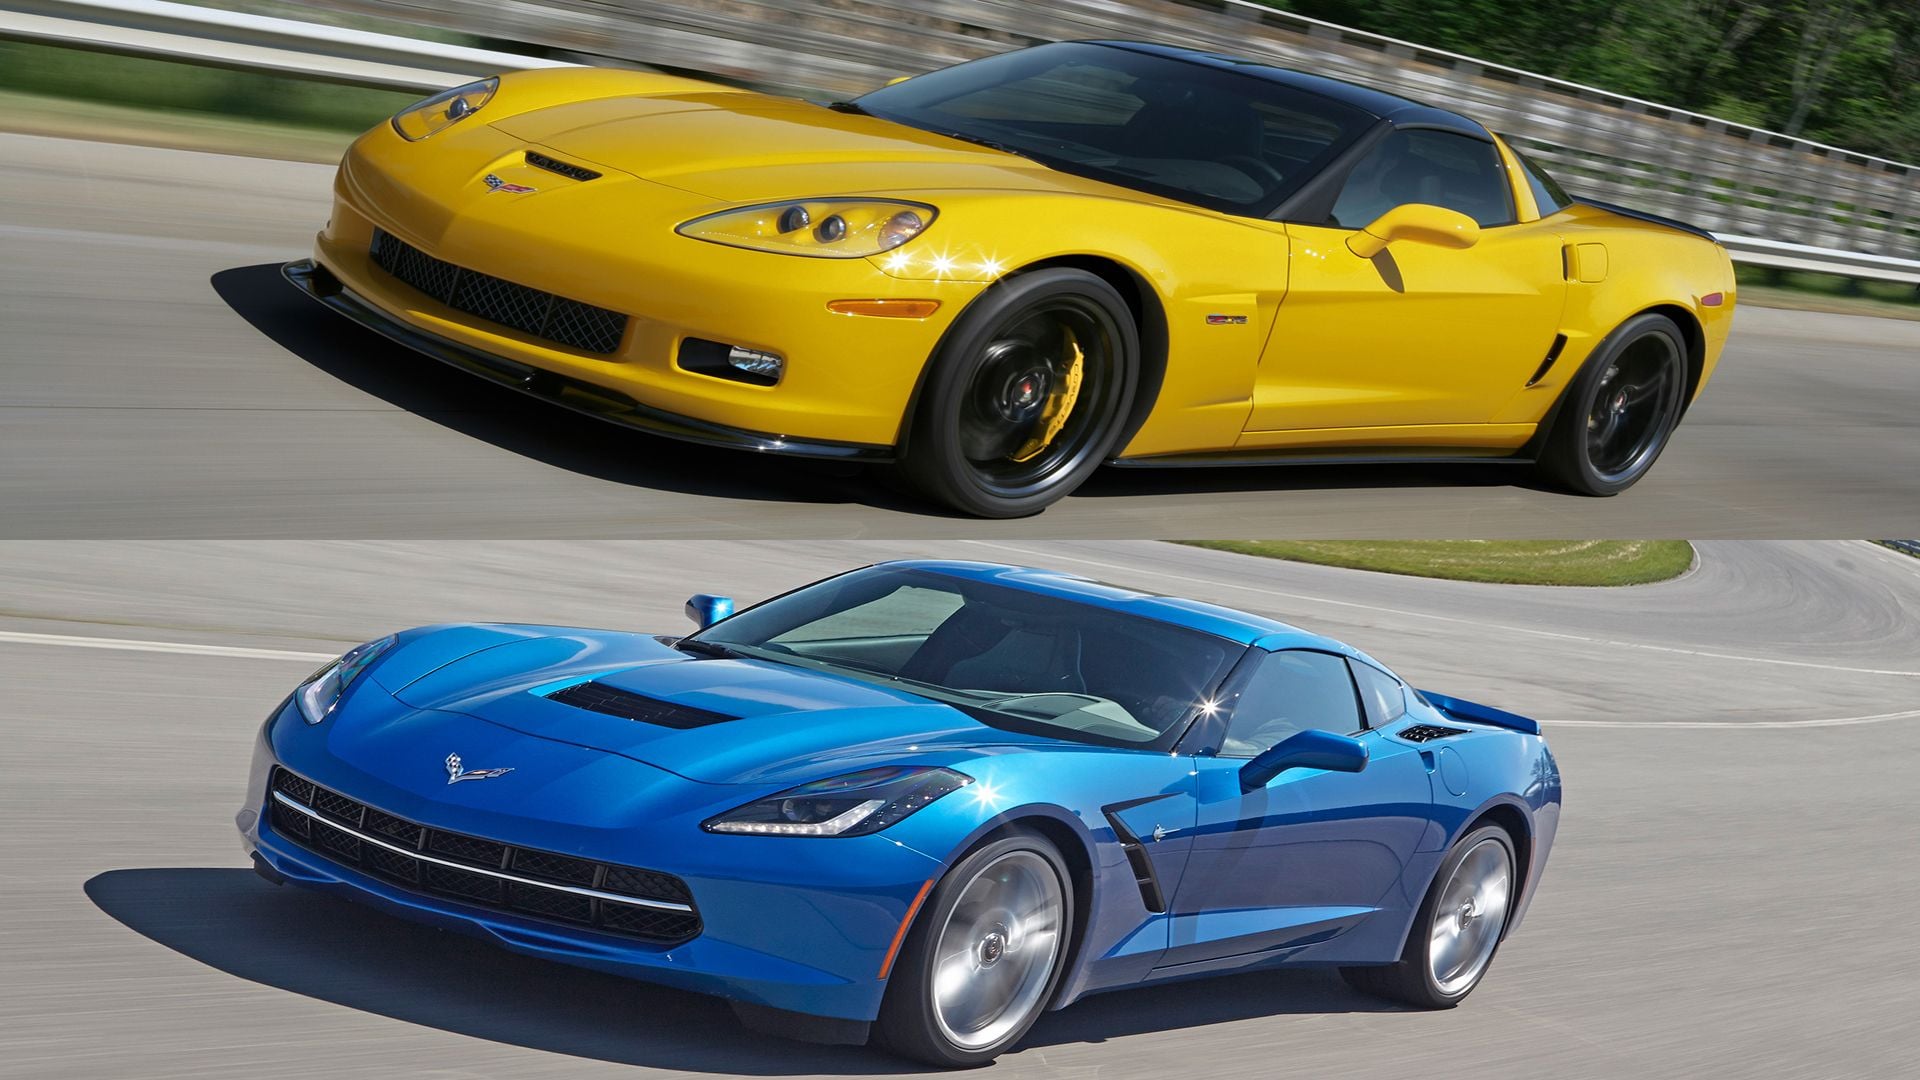 c7-of-the-year-appearance-modifications-corvetteforum-chevrolet